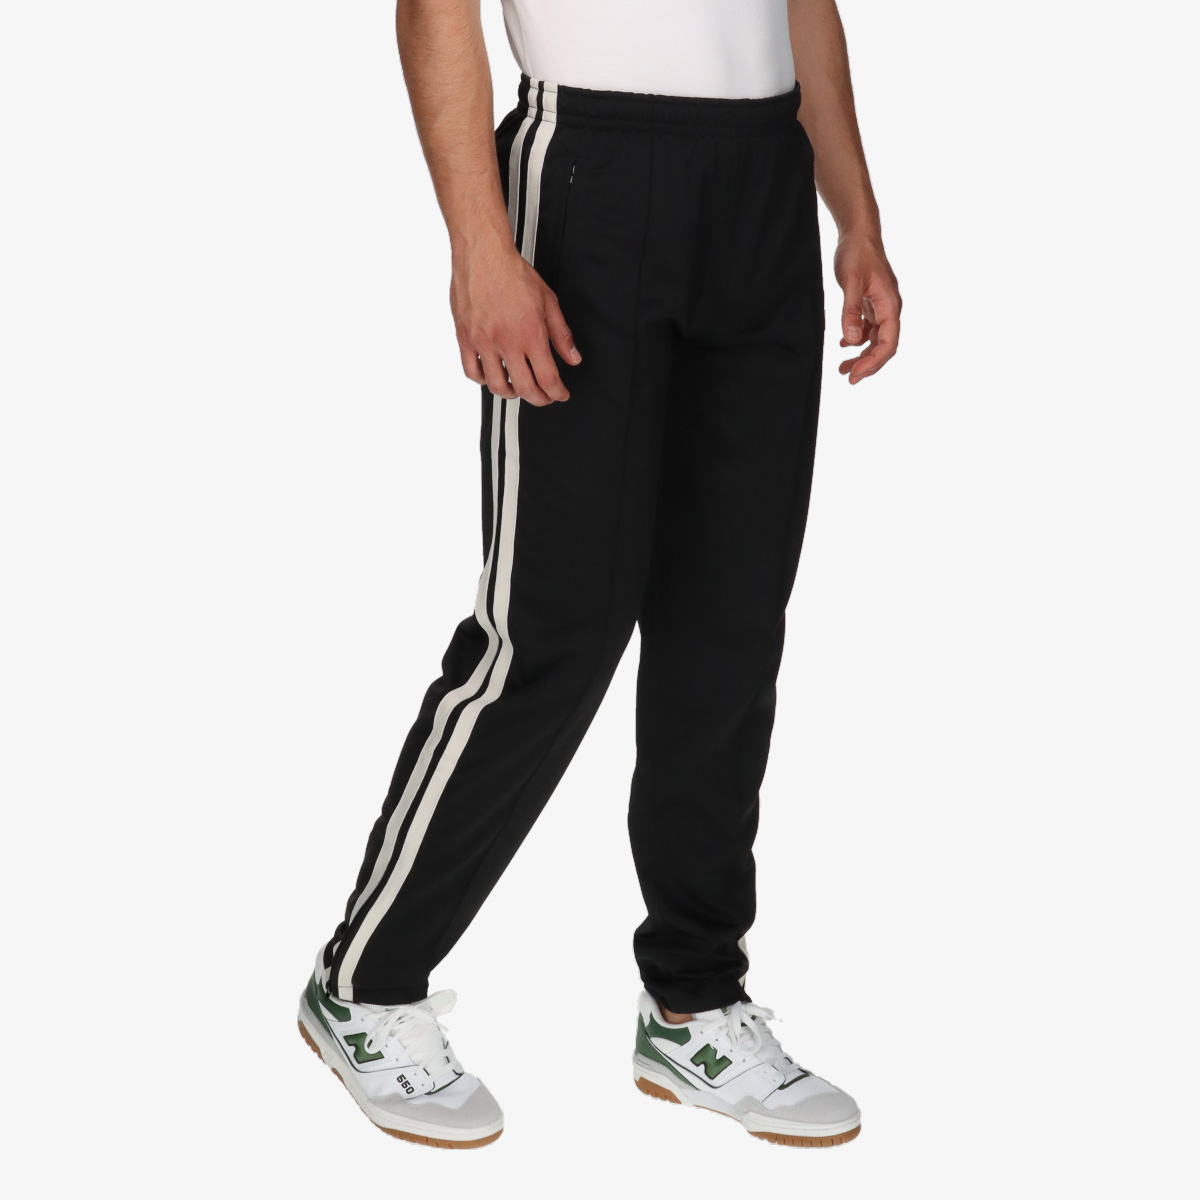 Russell Athletic Donji dio trenerke ALISTAIR-TRACK PANT 